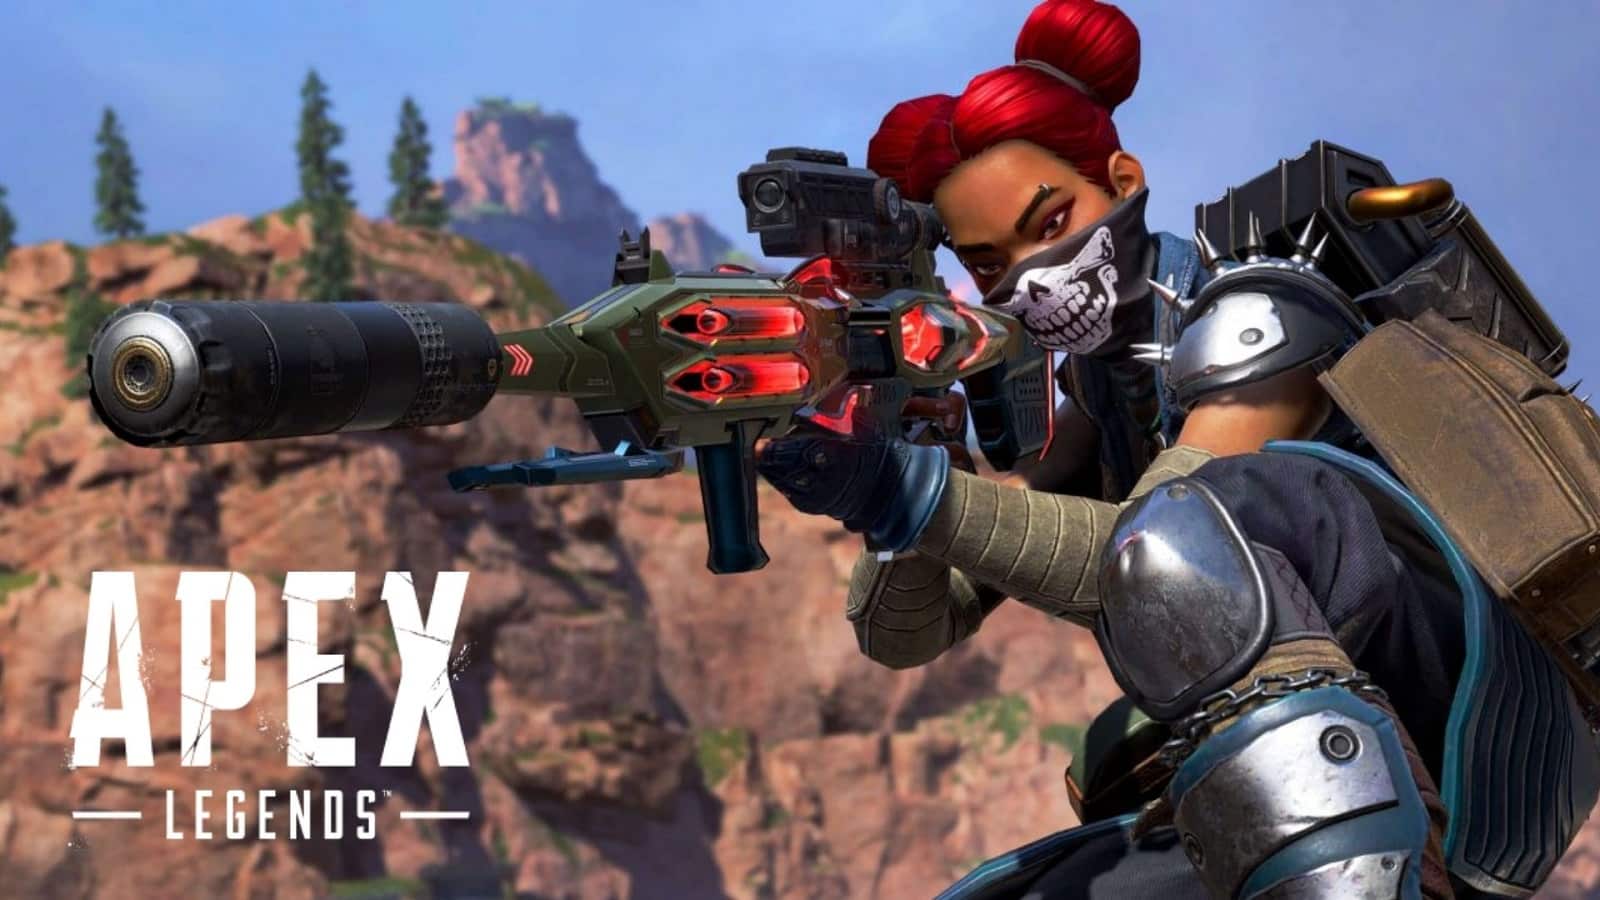 Top 25 Apex Legends Best Settings That Give You An Advantage Season 9 Gamers Decide